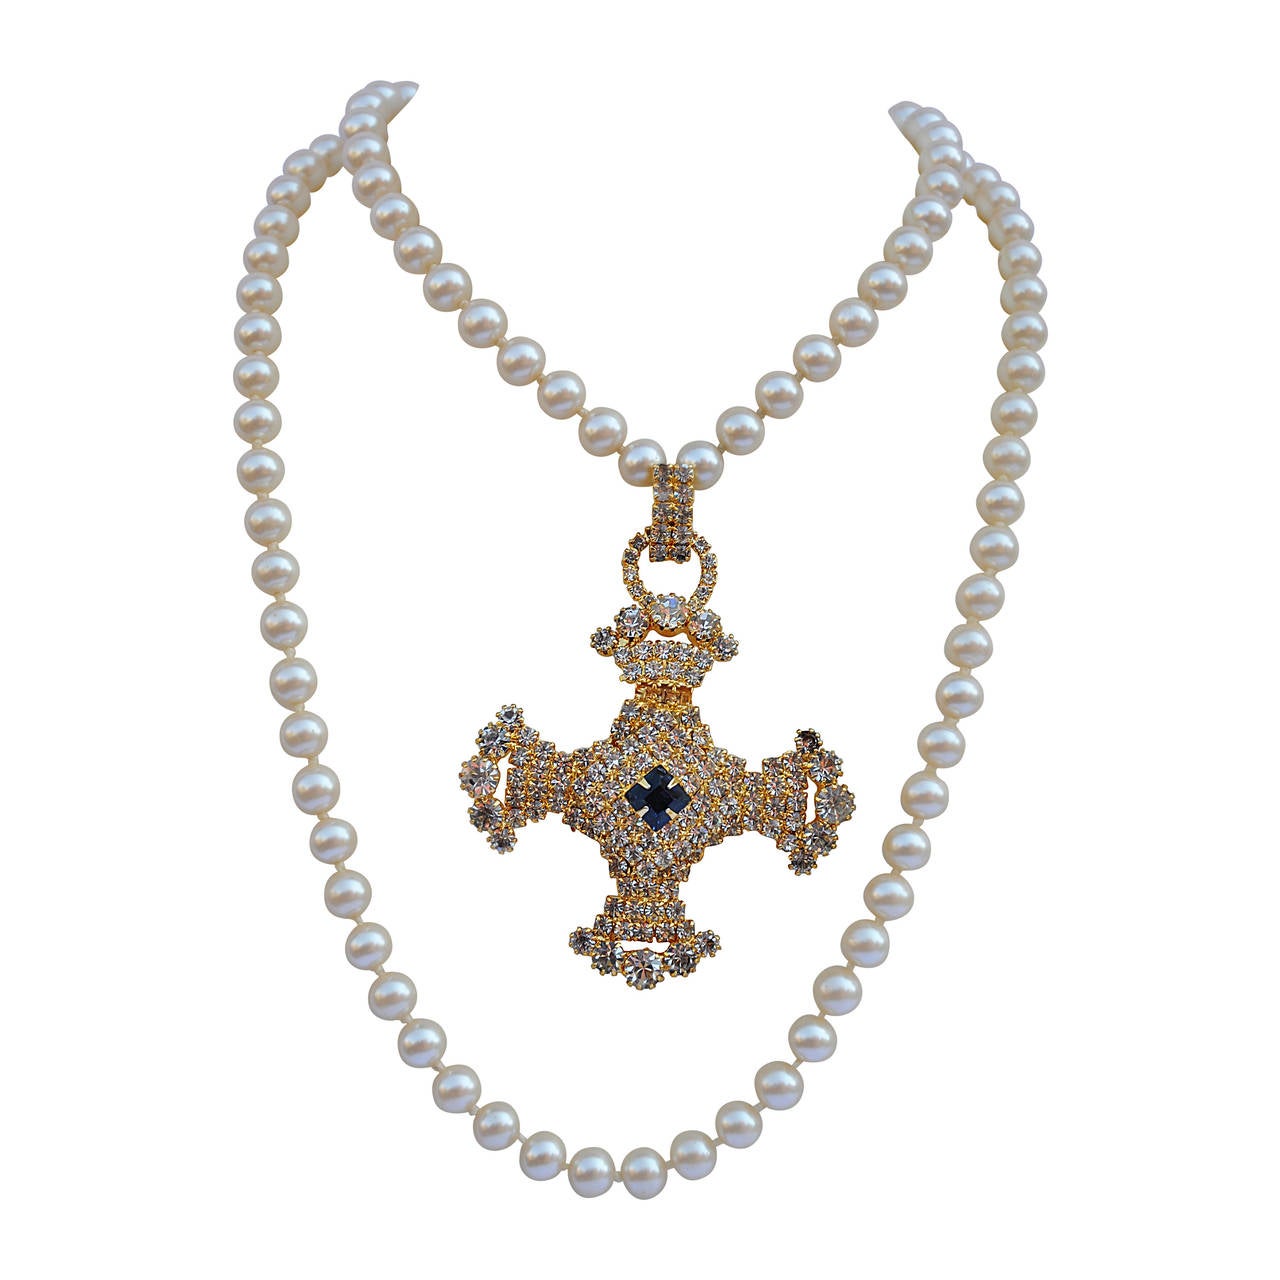 Magnificent Double-Strand Pearl Necklace with Huge Rhinestone Cross